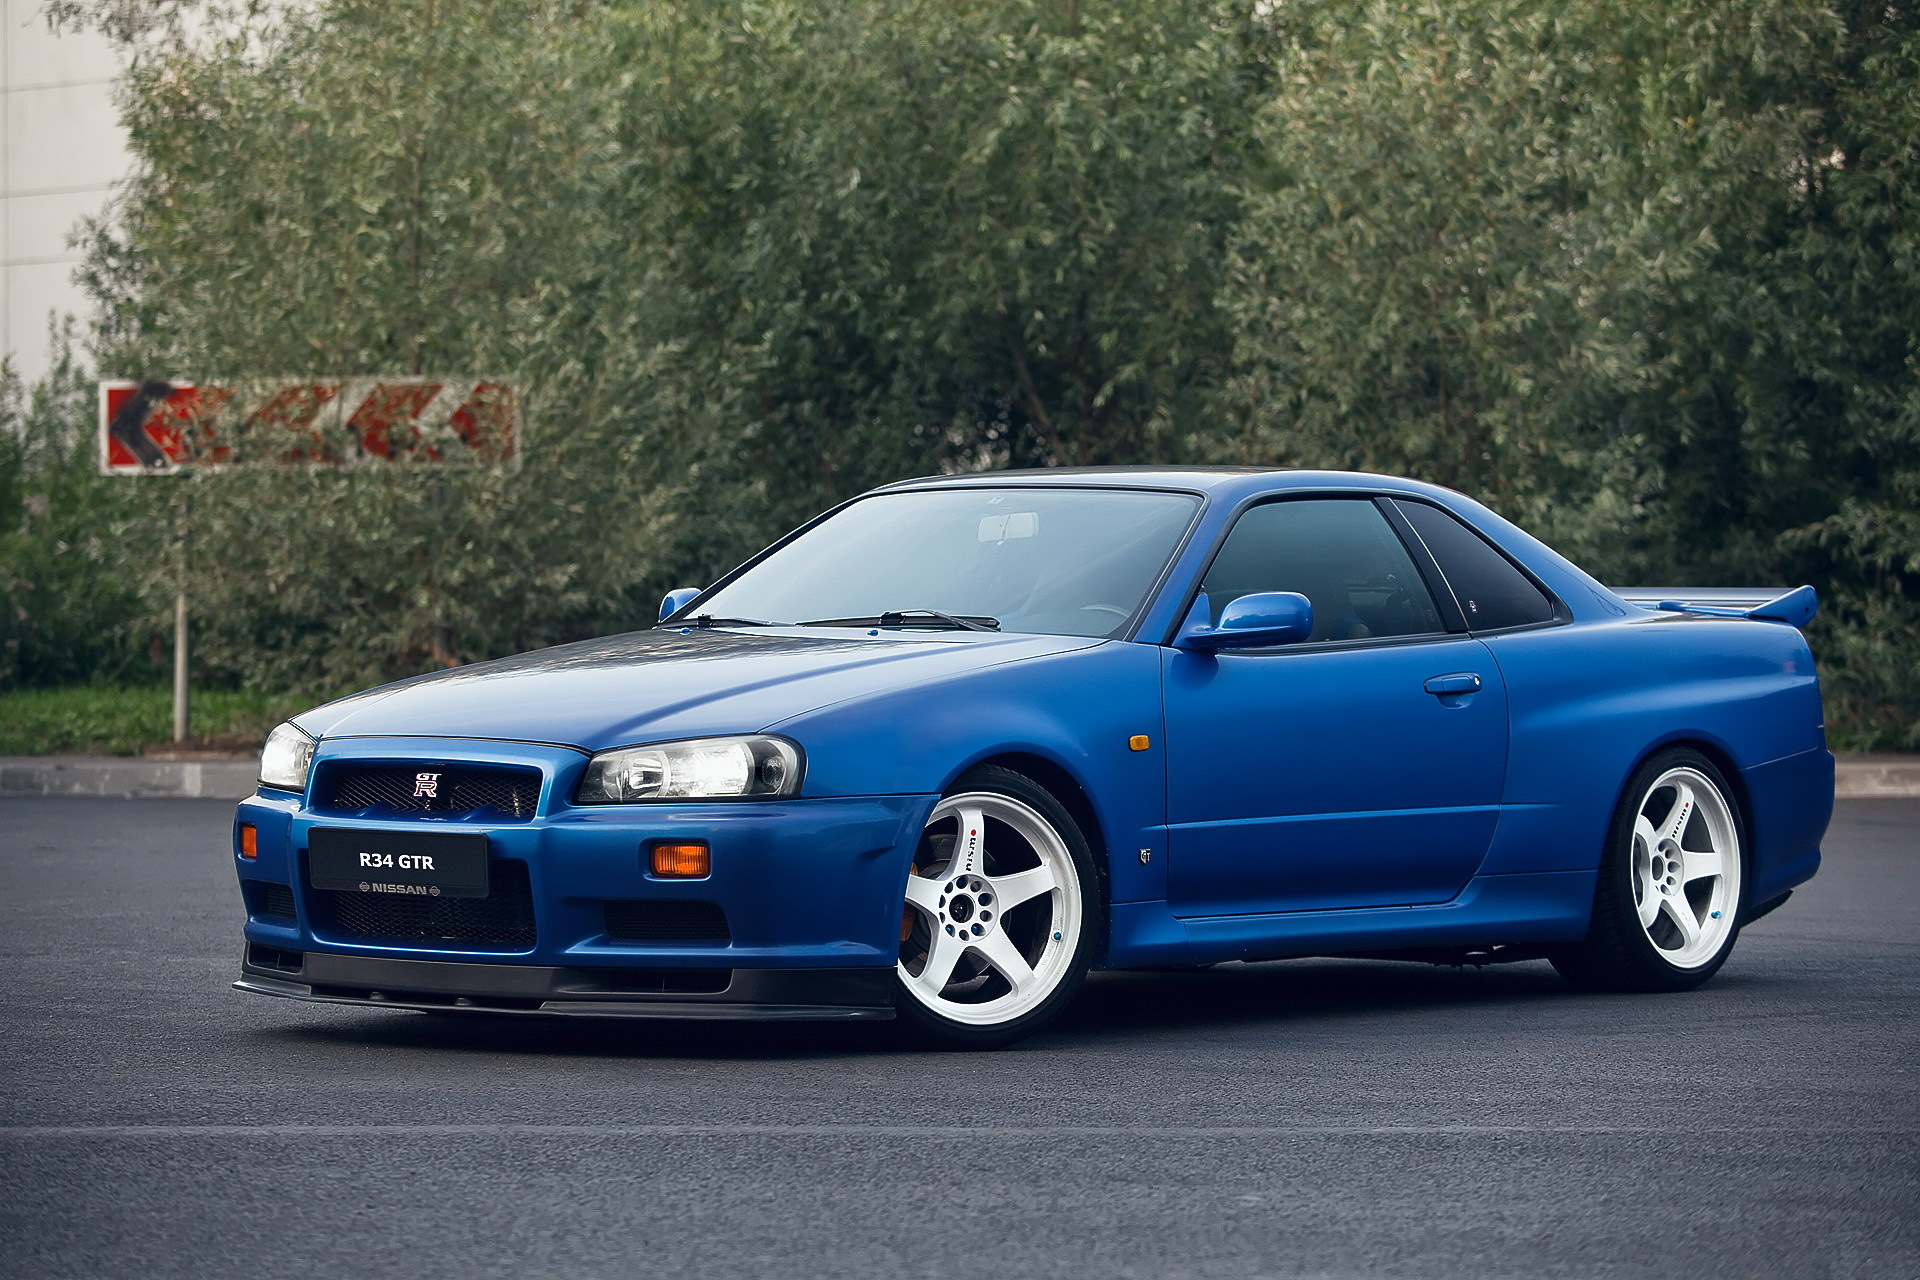 1920x1280 10+ Nissan Skyline R34 HD Wallpapers and Backgrounds